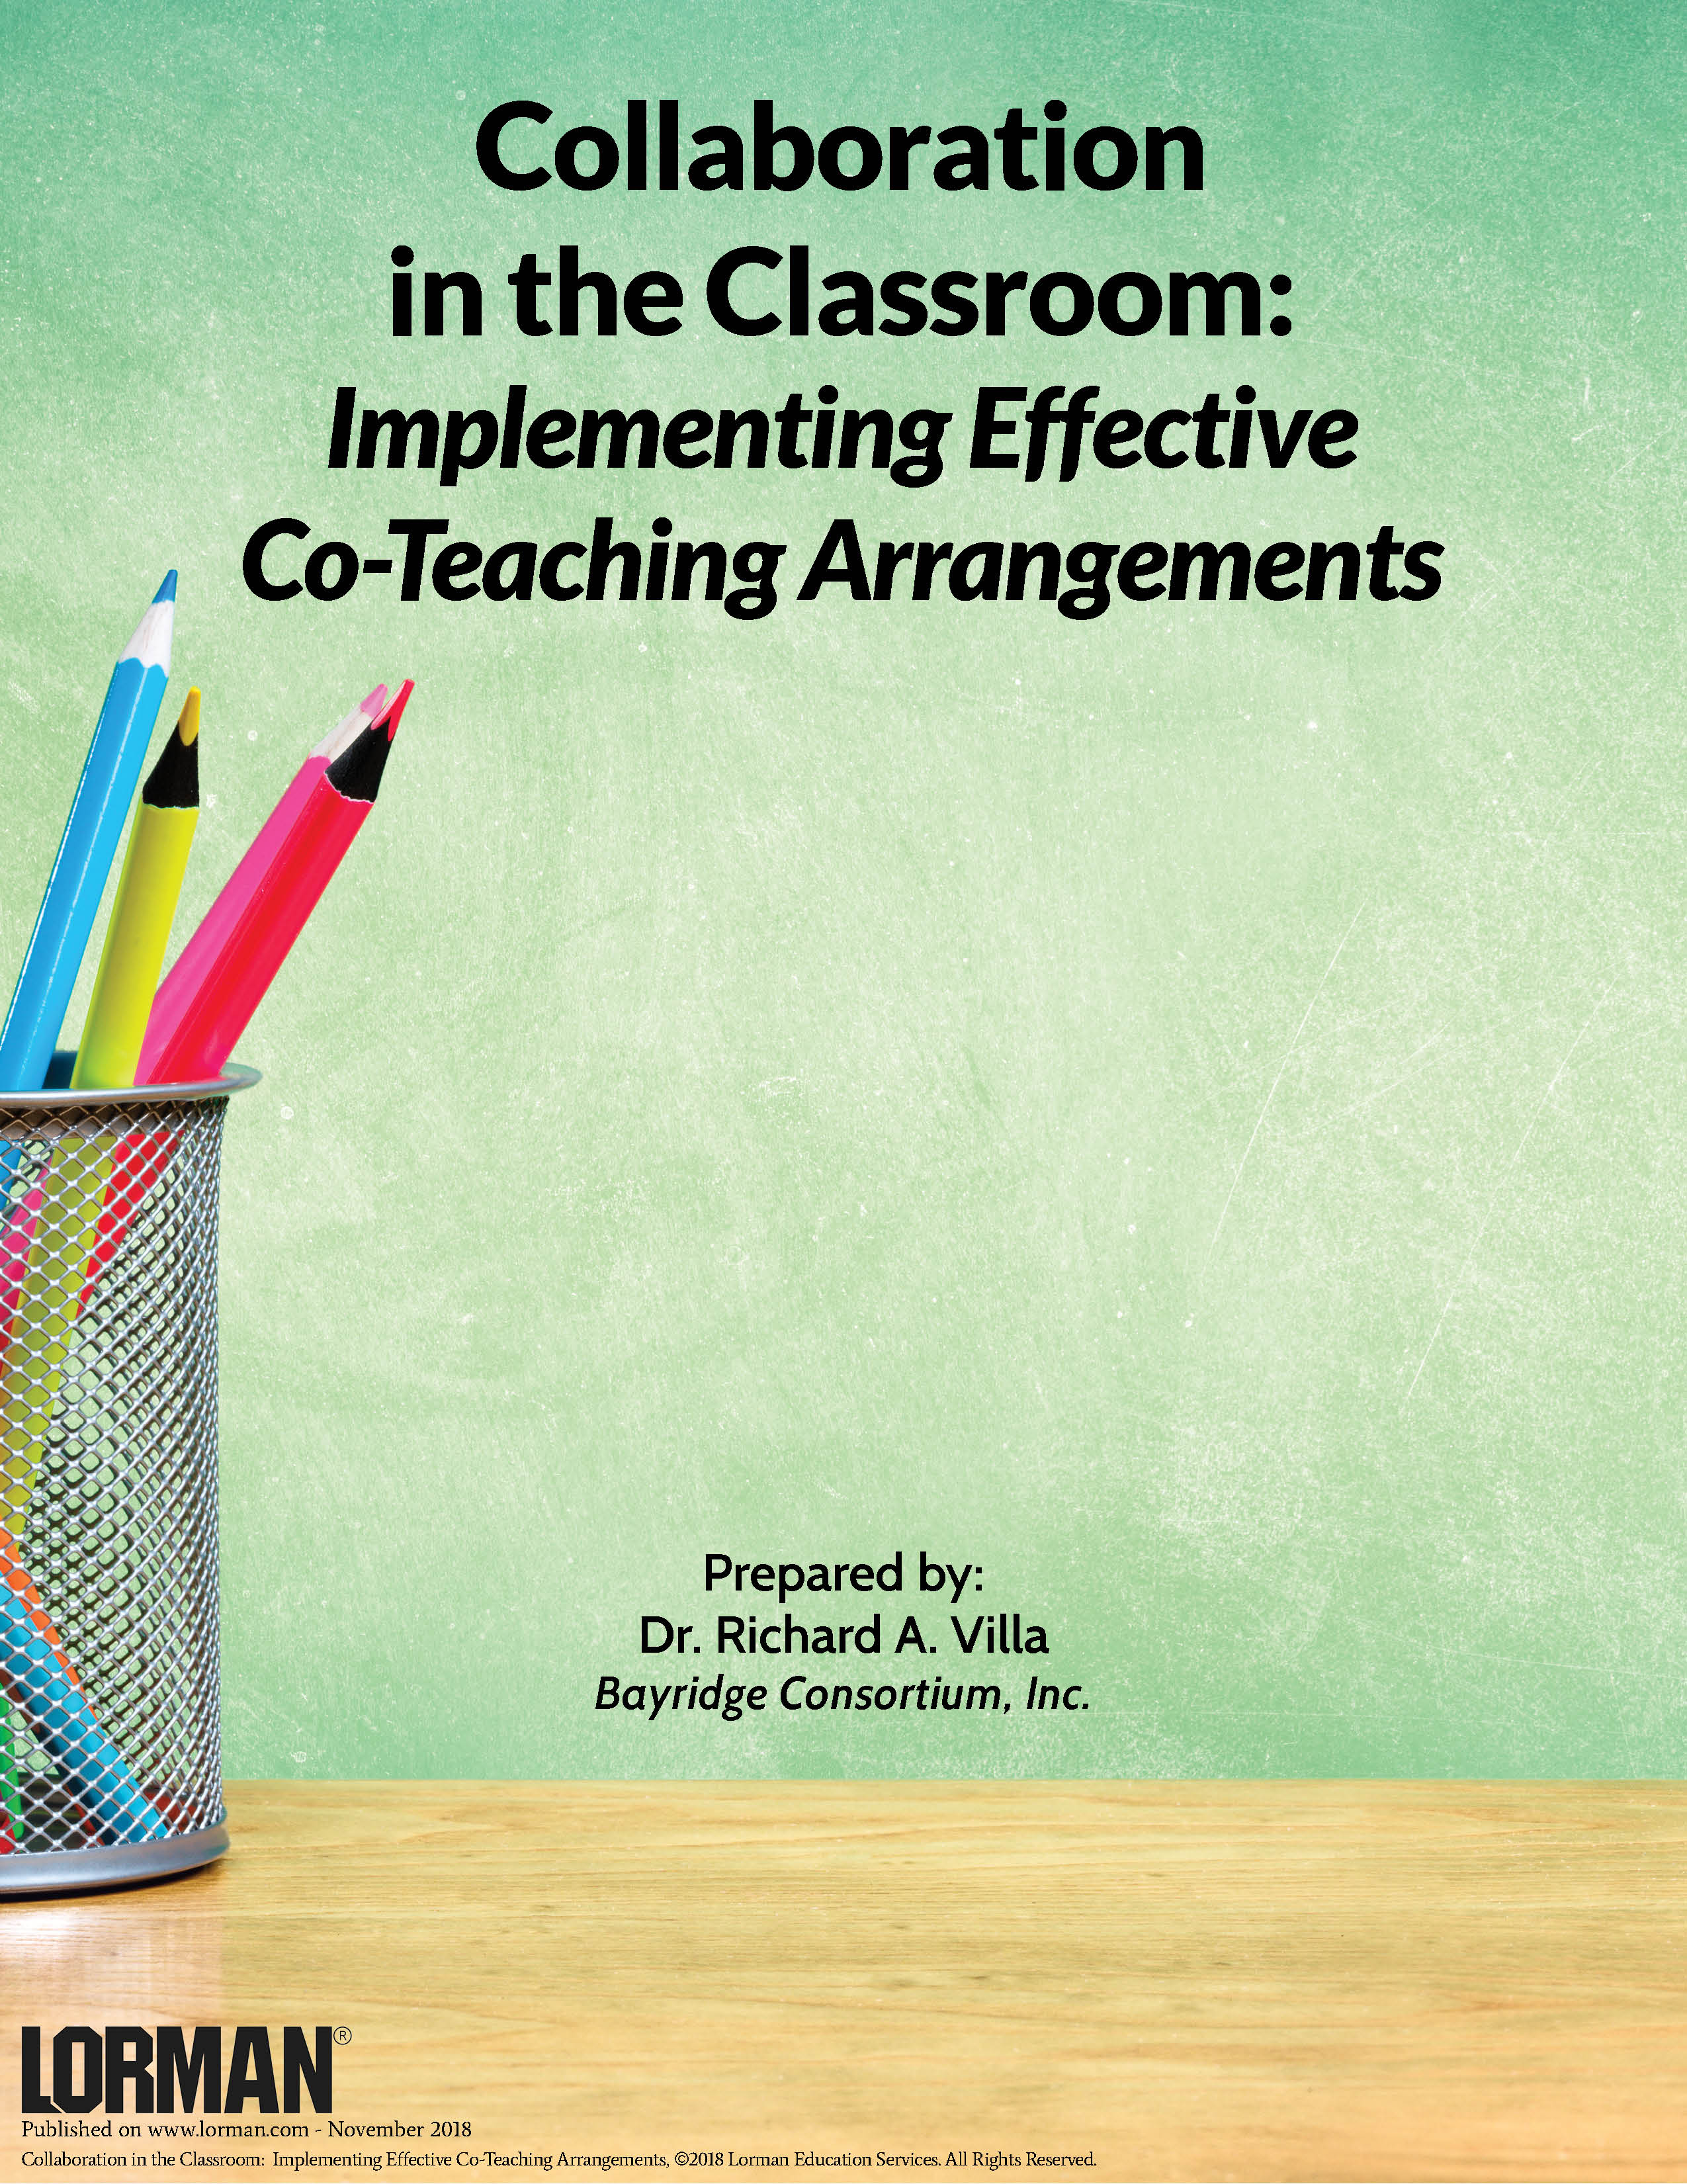 Collaboration in the Classroom: Implementing Effective Co-Teaching Arrangements